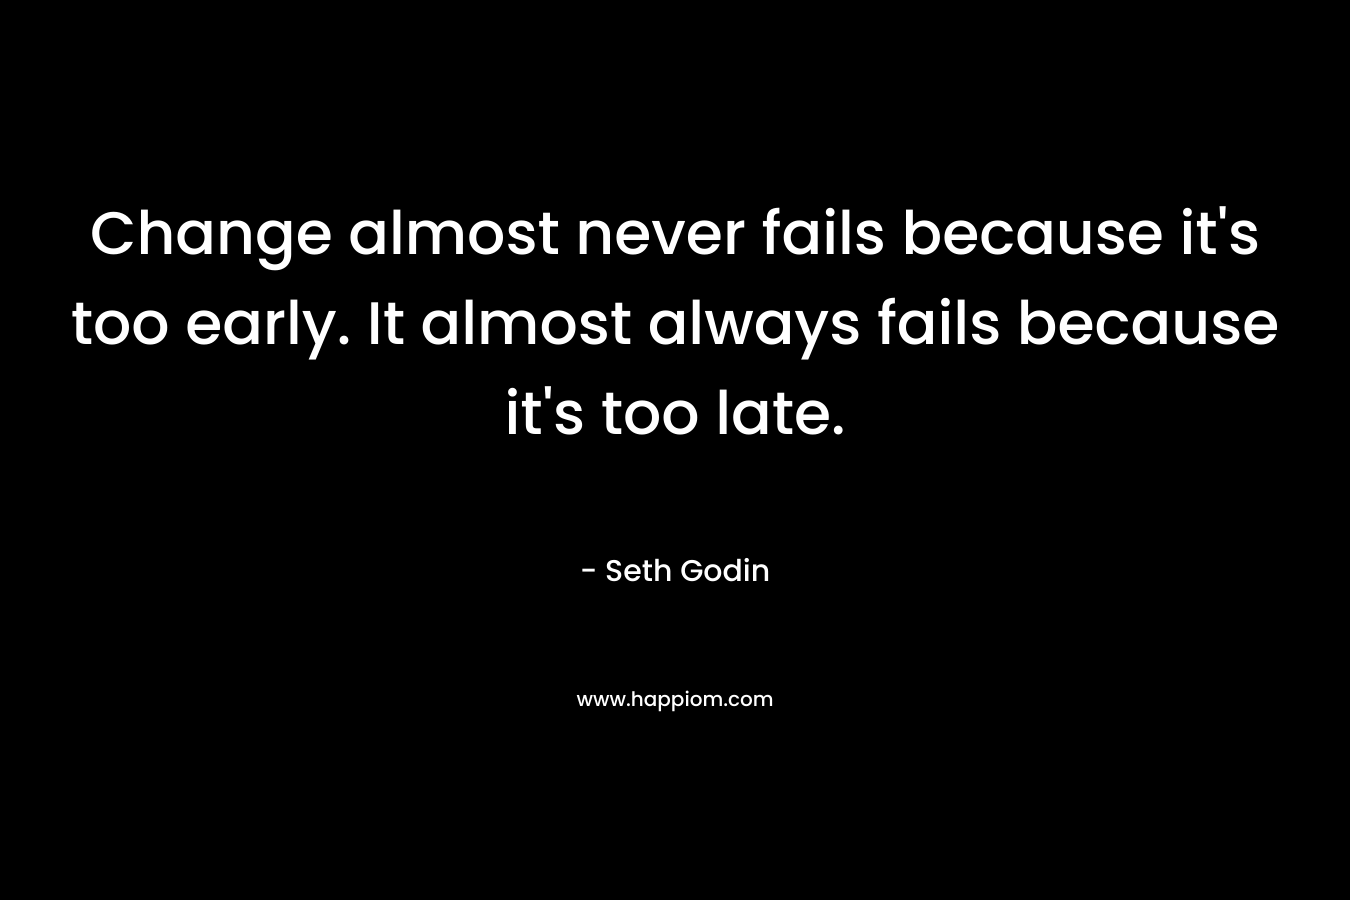 Change almost never fails because it’s too early. It almost always fails because it’s too late. – Seth Godin